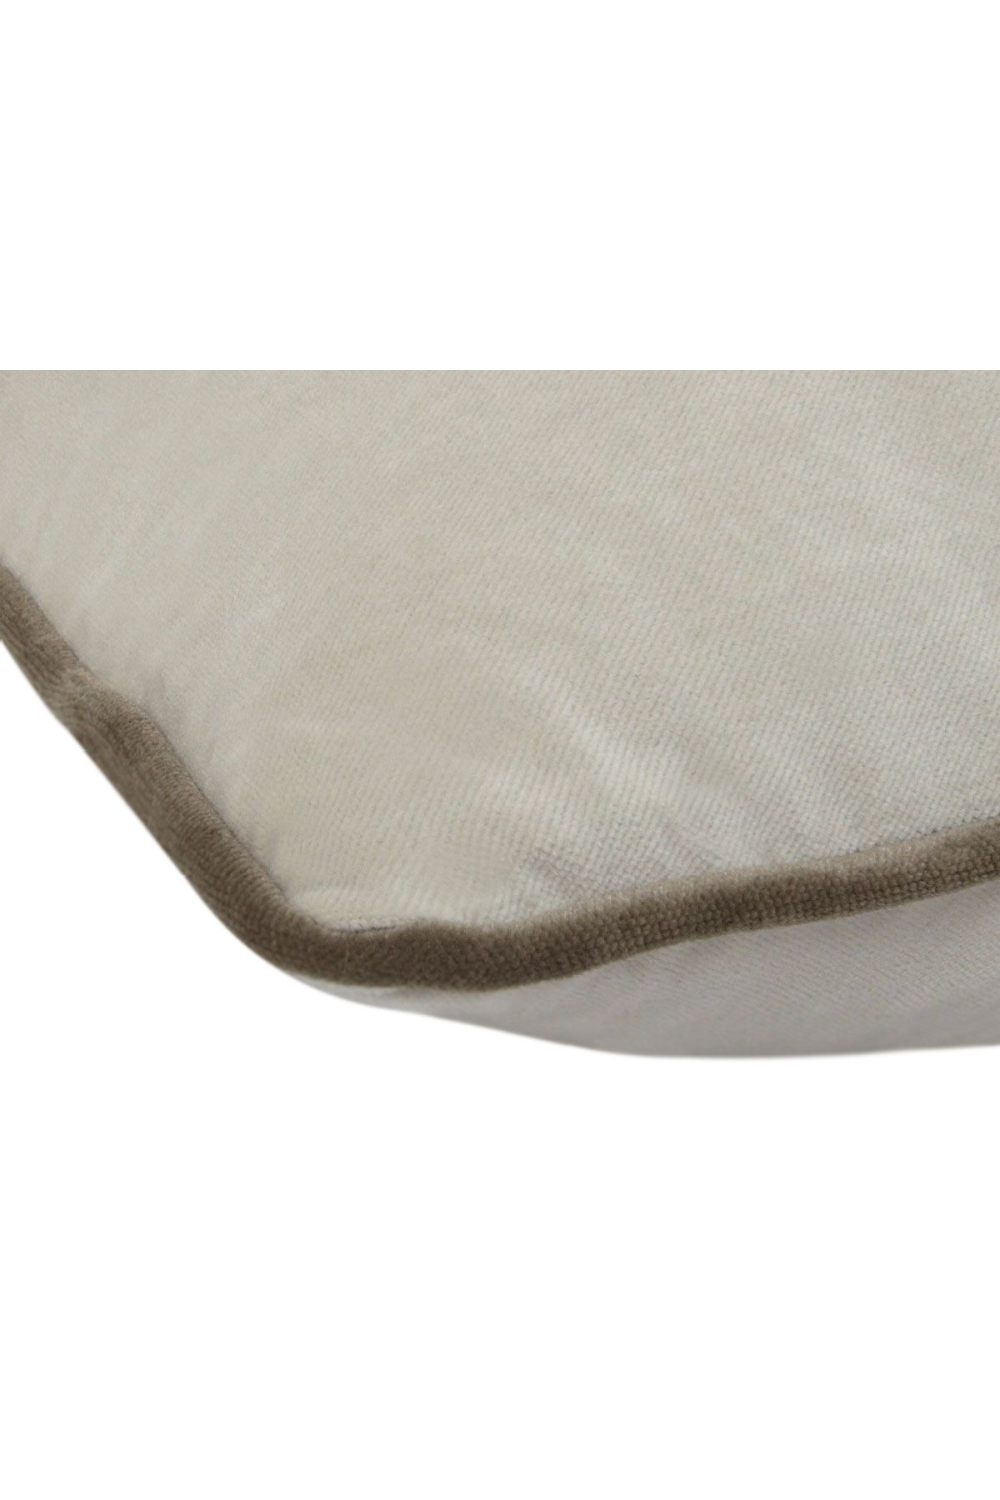 Offwhite Velvet Cushion with Taupe Piping | Andrew Martin Pelham